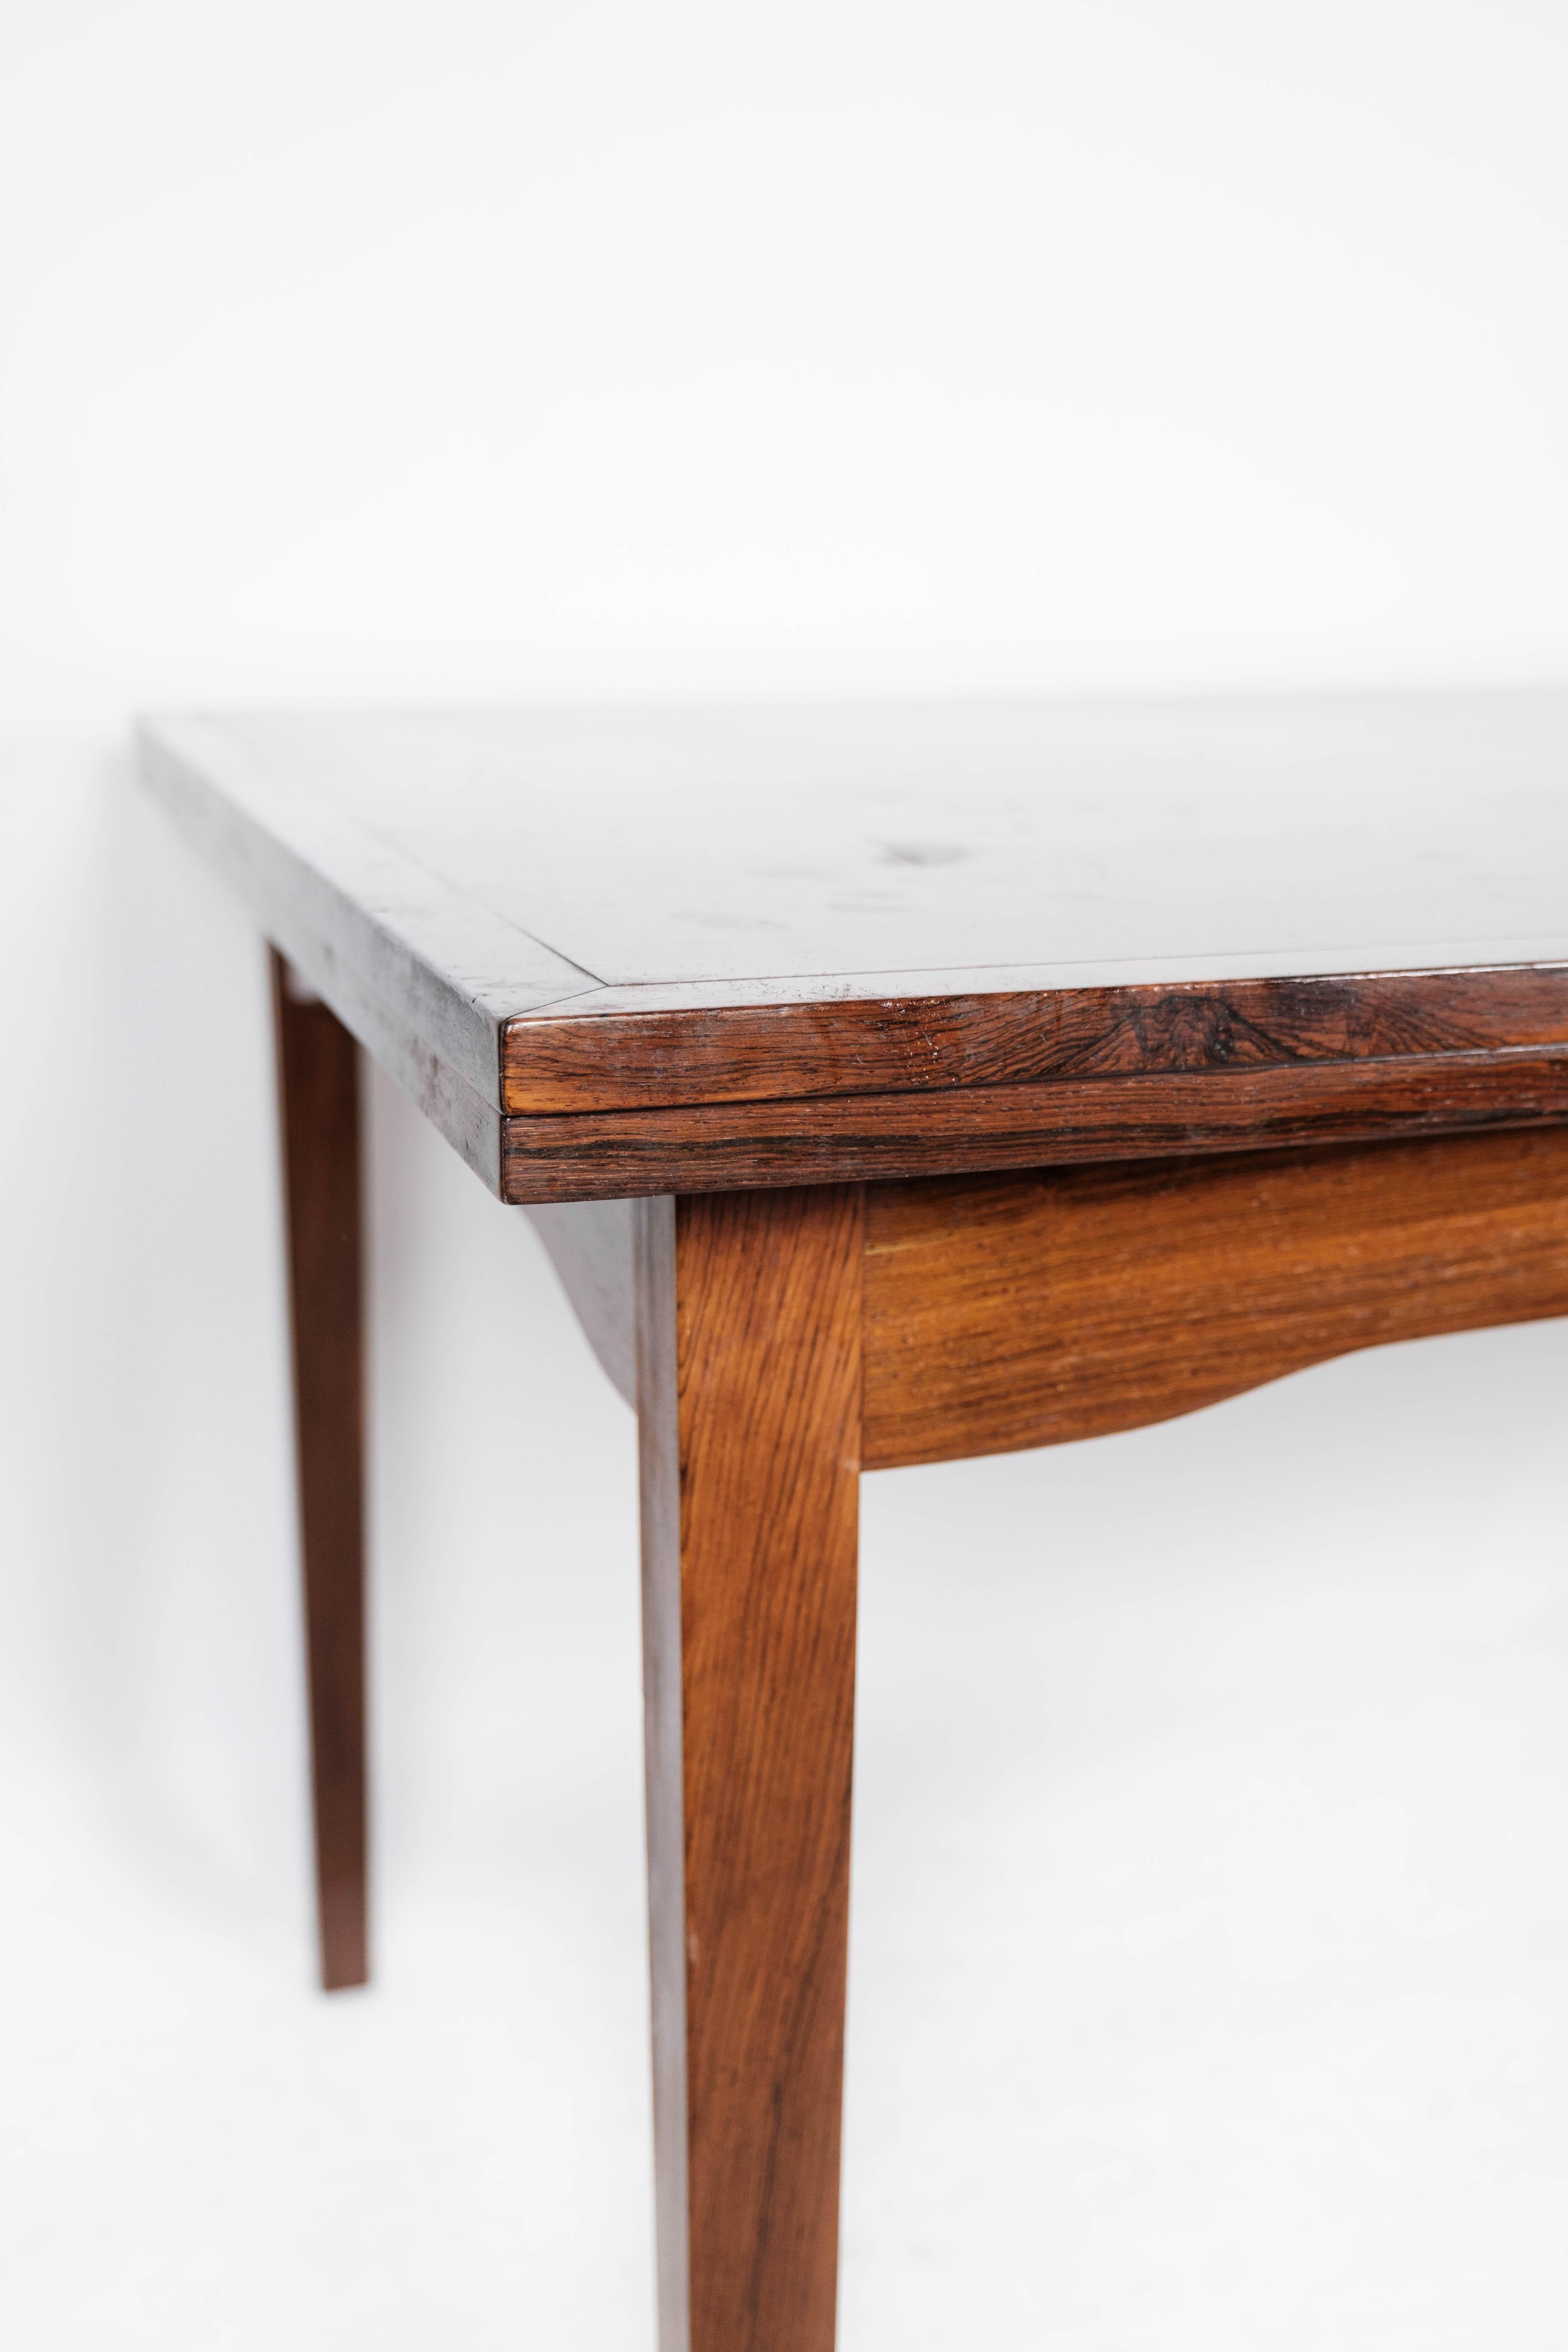 Mid-20th Century Dining Table in Rosewood with Extension, of Danish Design by Ellegaard, 1960s For Sale